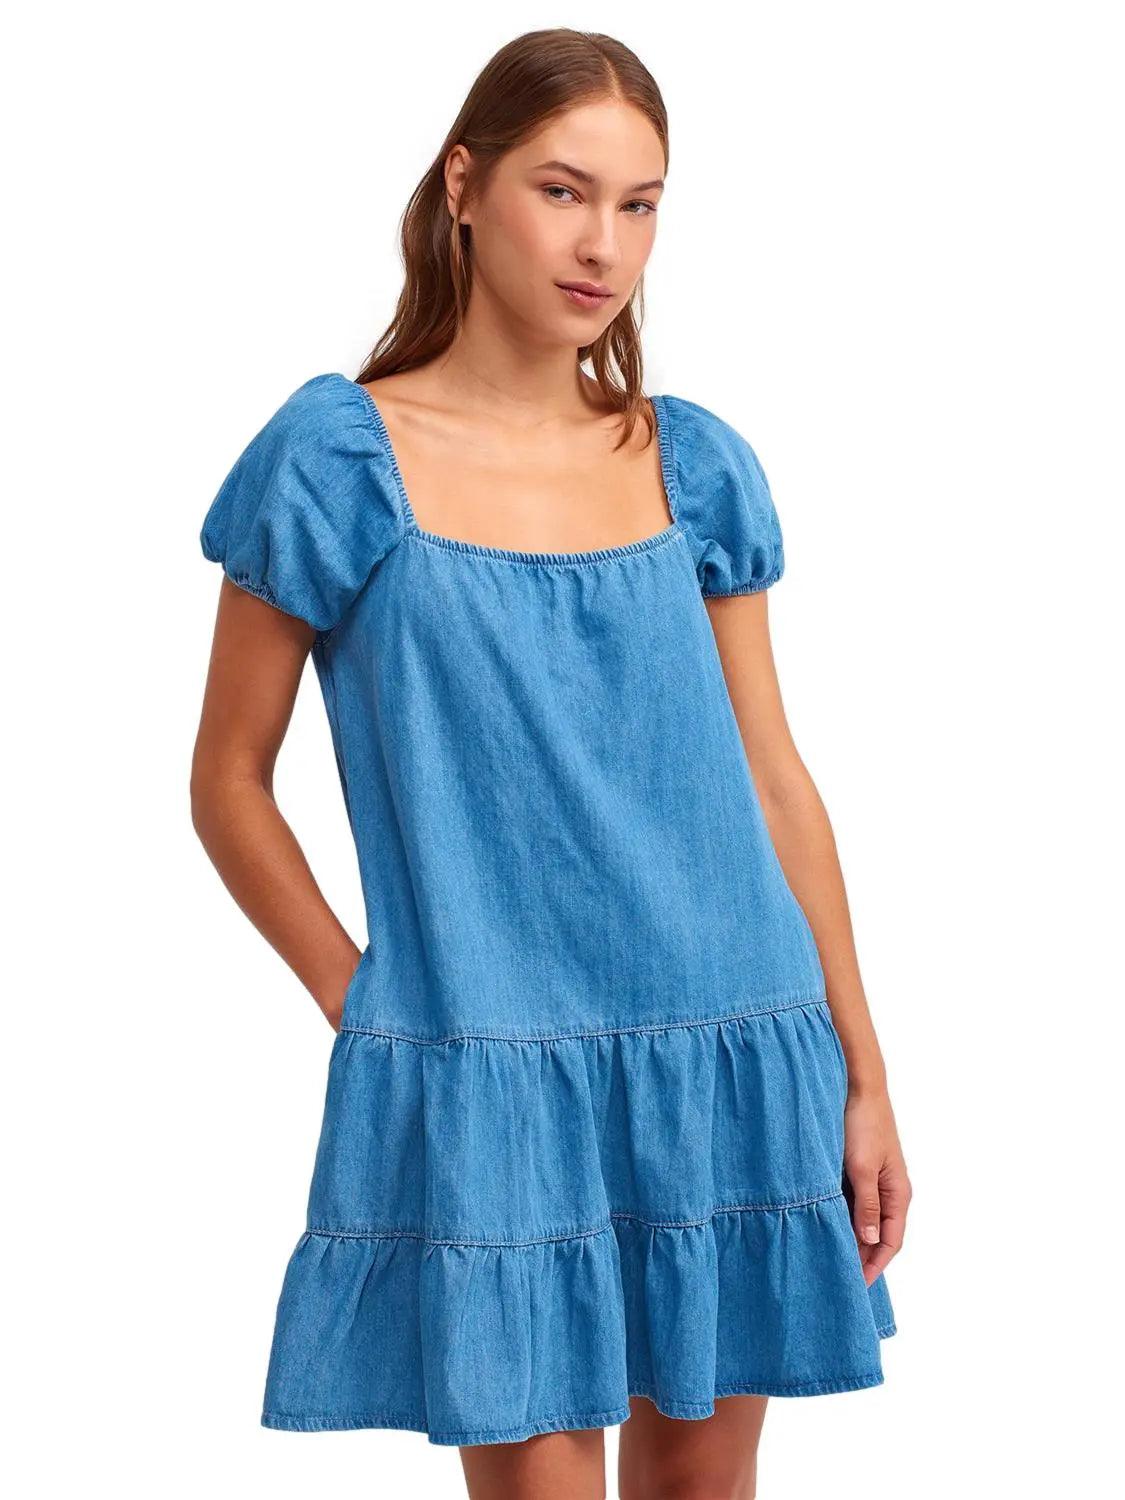 Denim Dress With Elasticized Sleeves And Shoulders Blue / XS / 2 ZEFASH